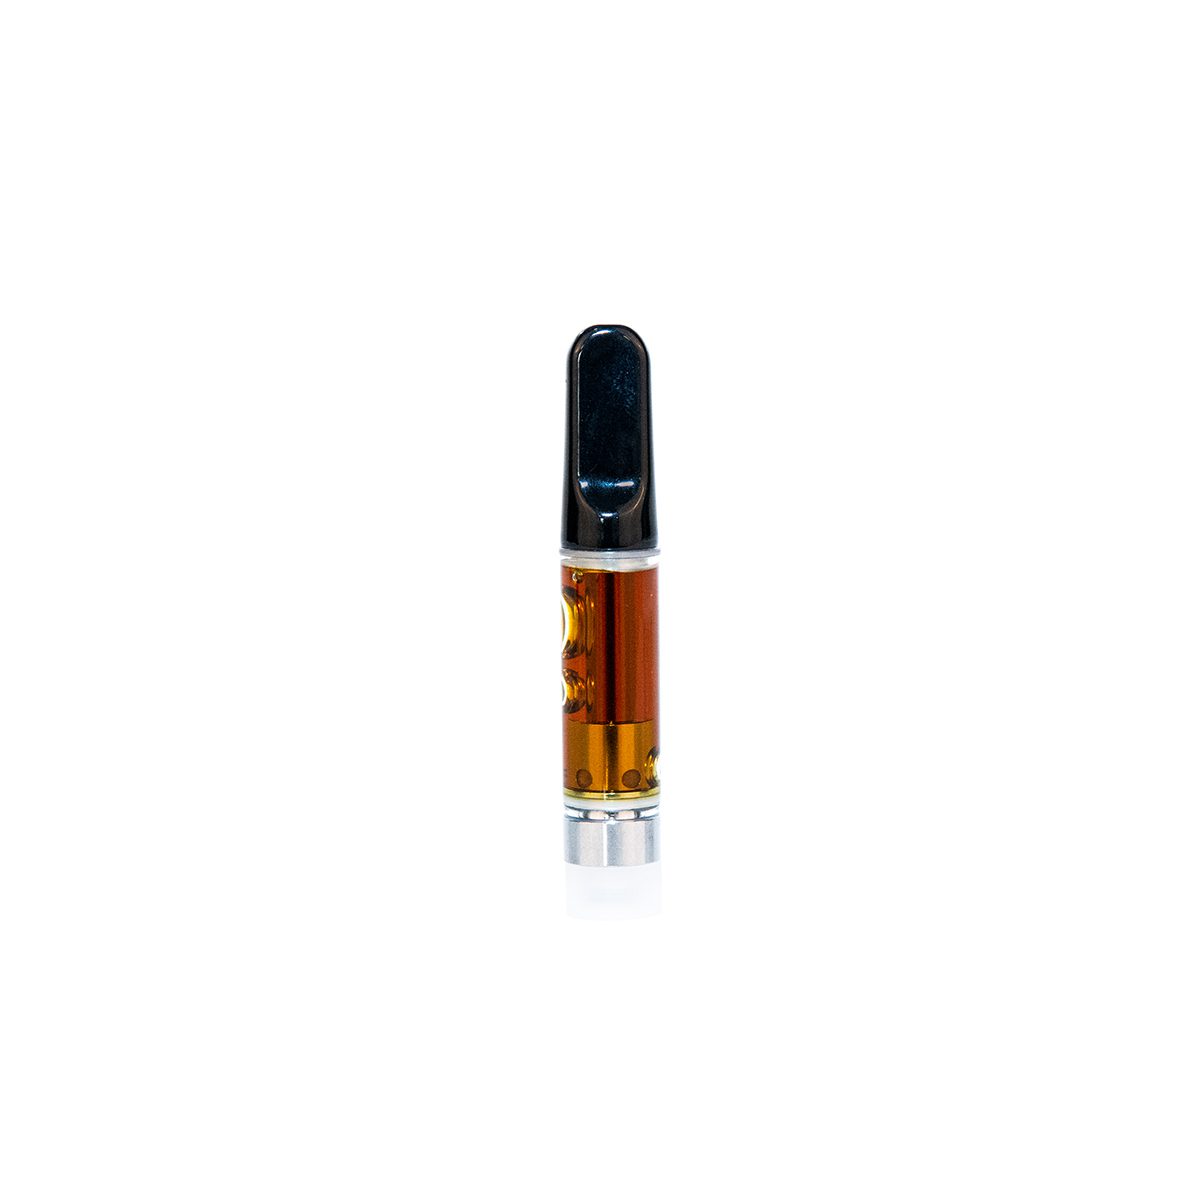 Dab Pen Refills by Dr Good Dabs at affordable prices | Drgooddabs.com